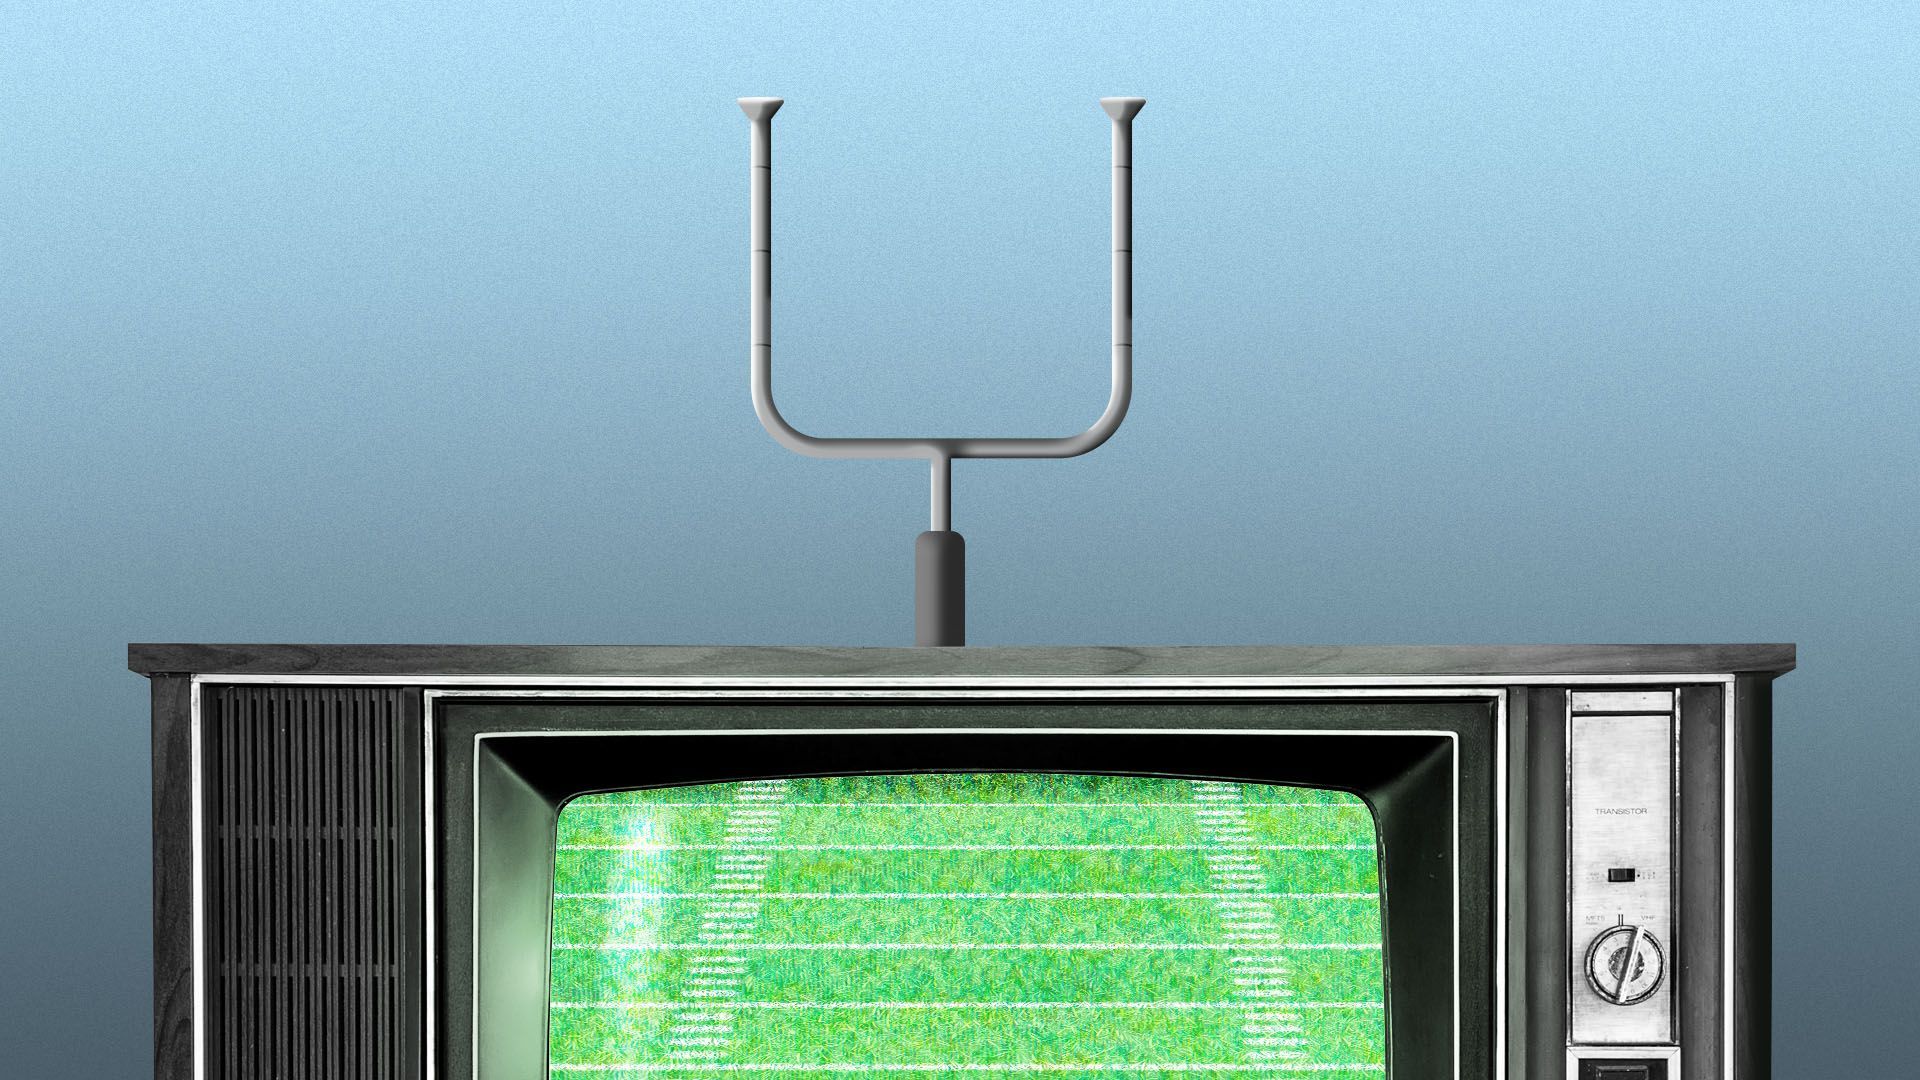 Illustration of a television with football goal posts for antenna